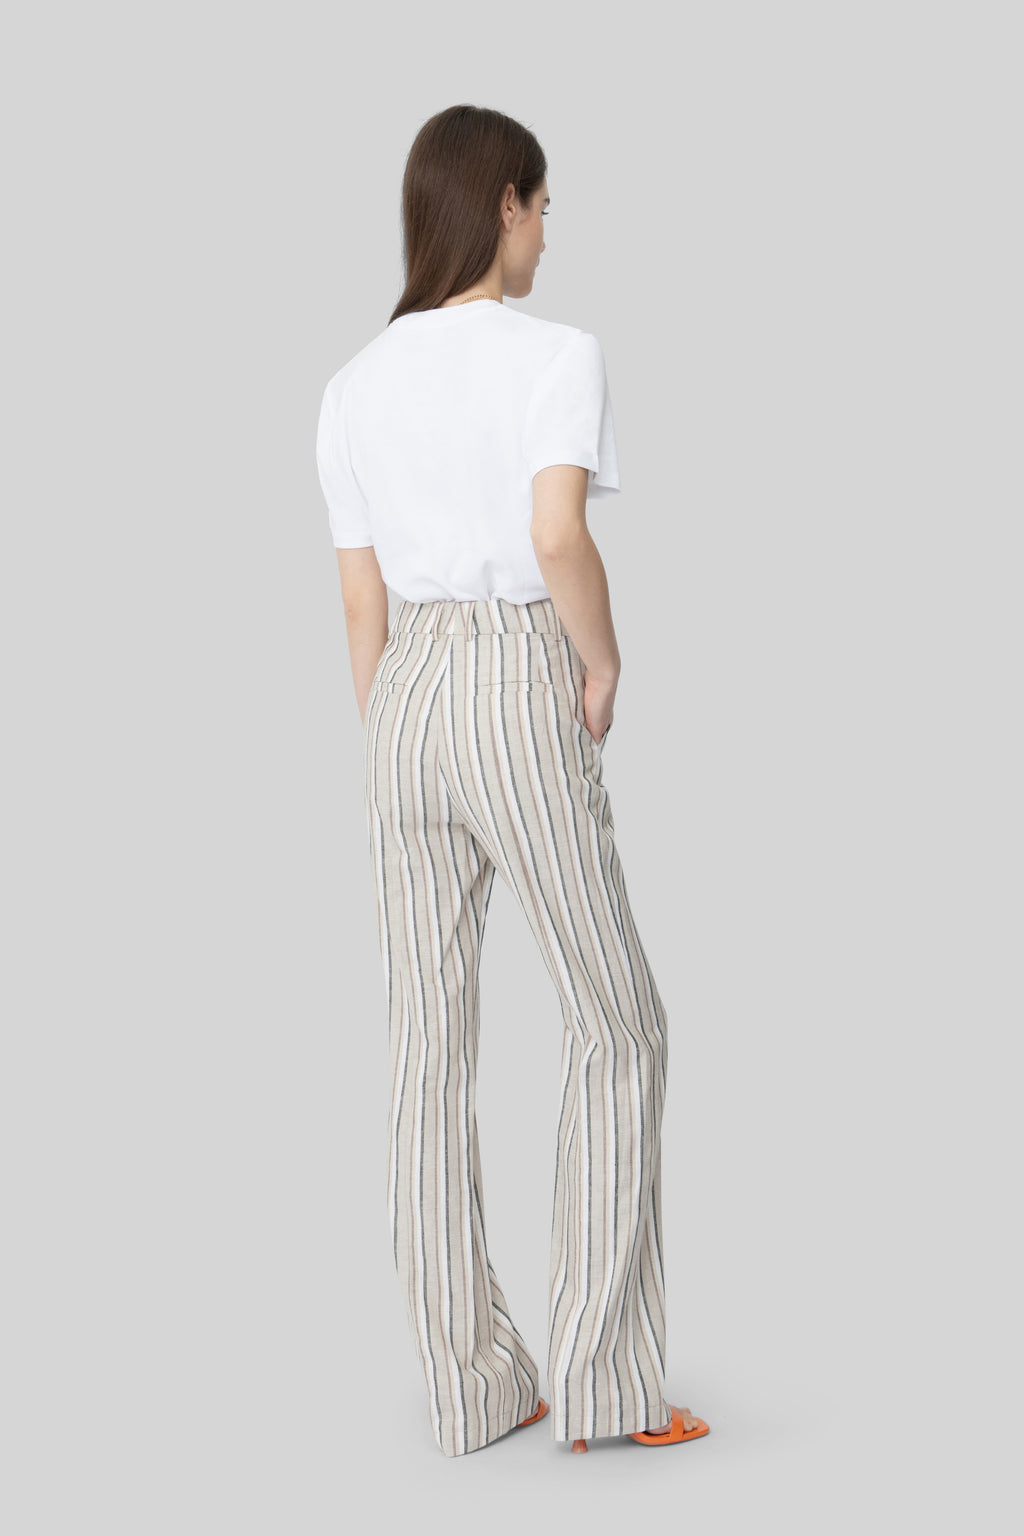 The Beige & Sand Striped Lover Pants